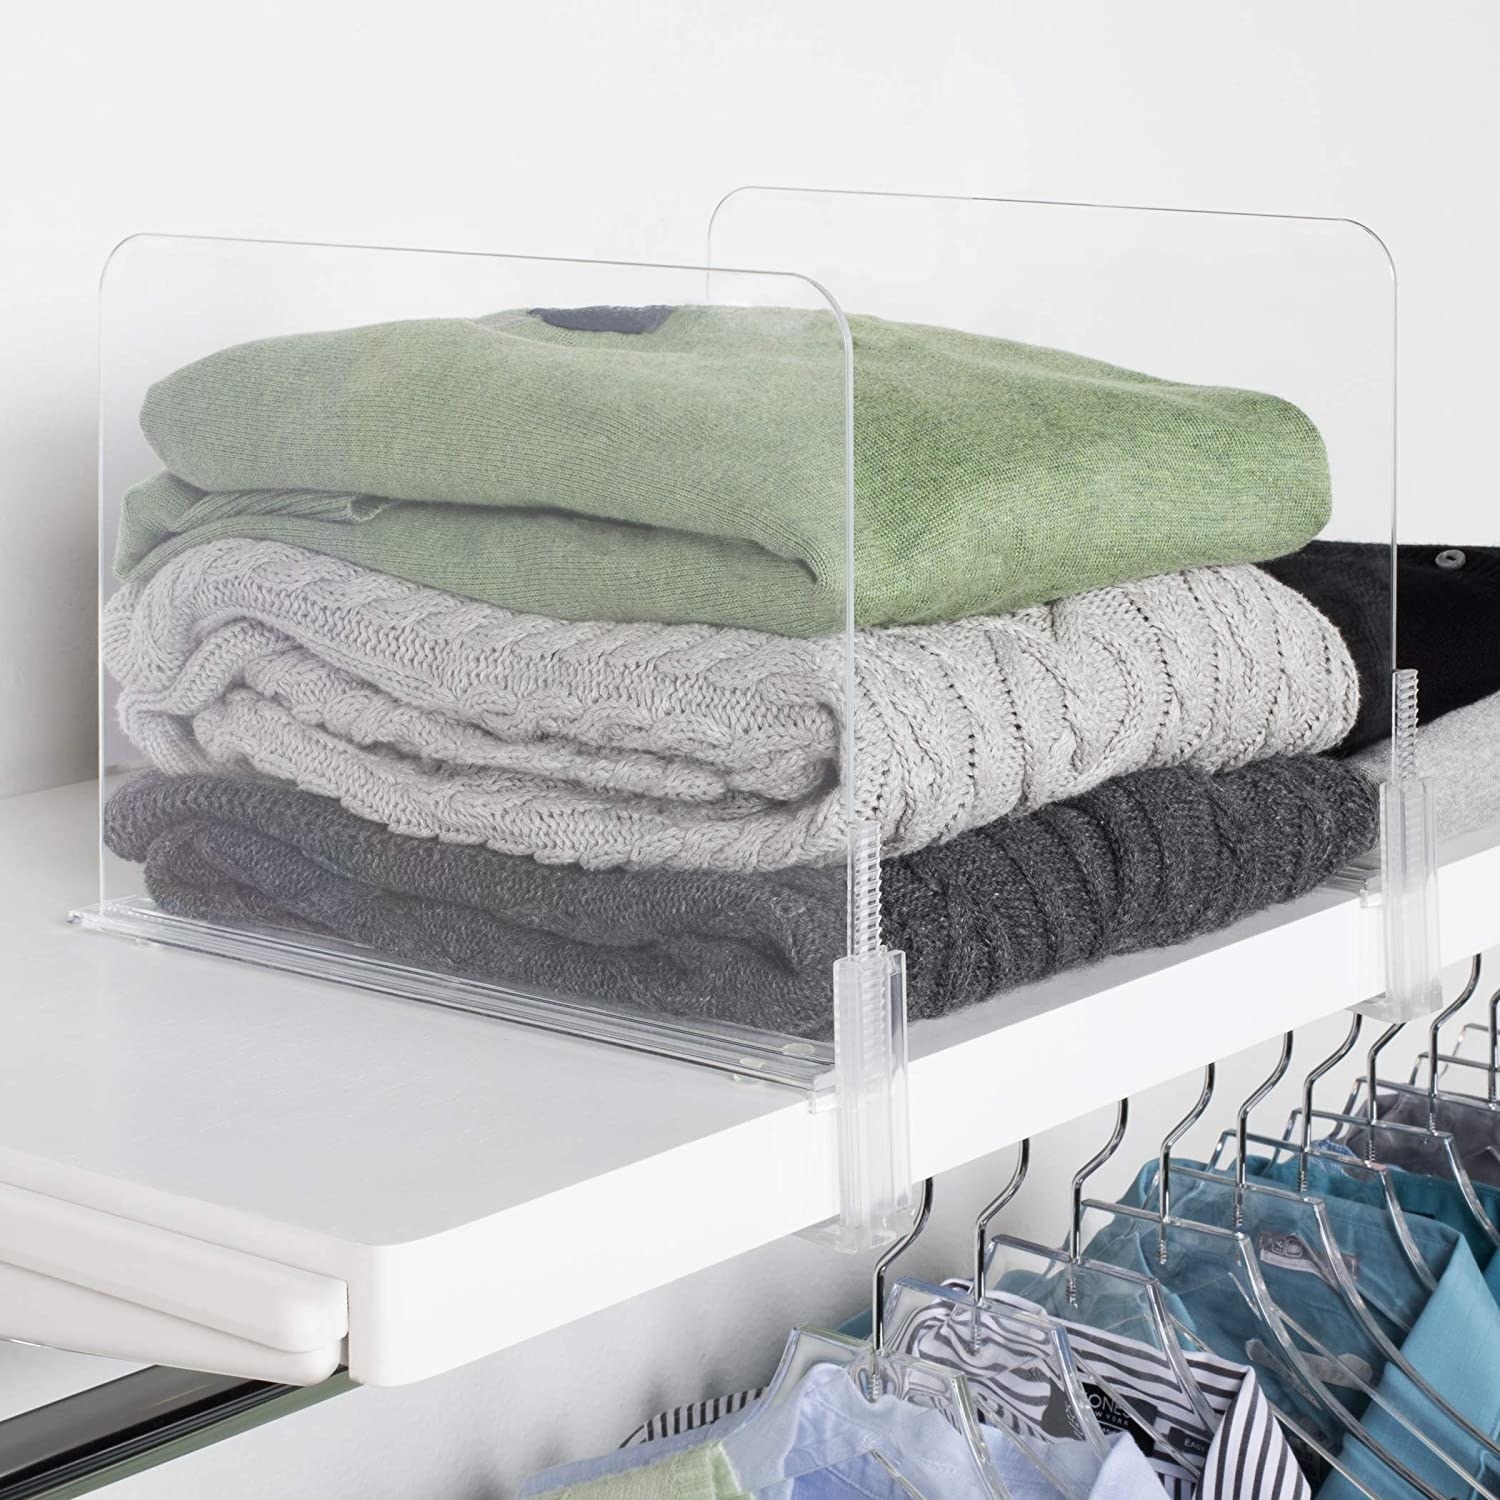 two dividers separate sweaters on a shelf in a closet